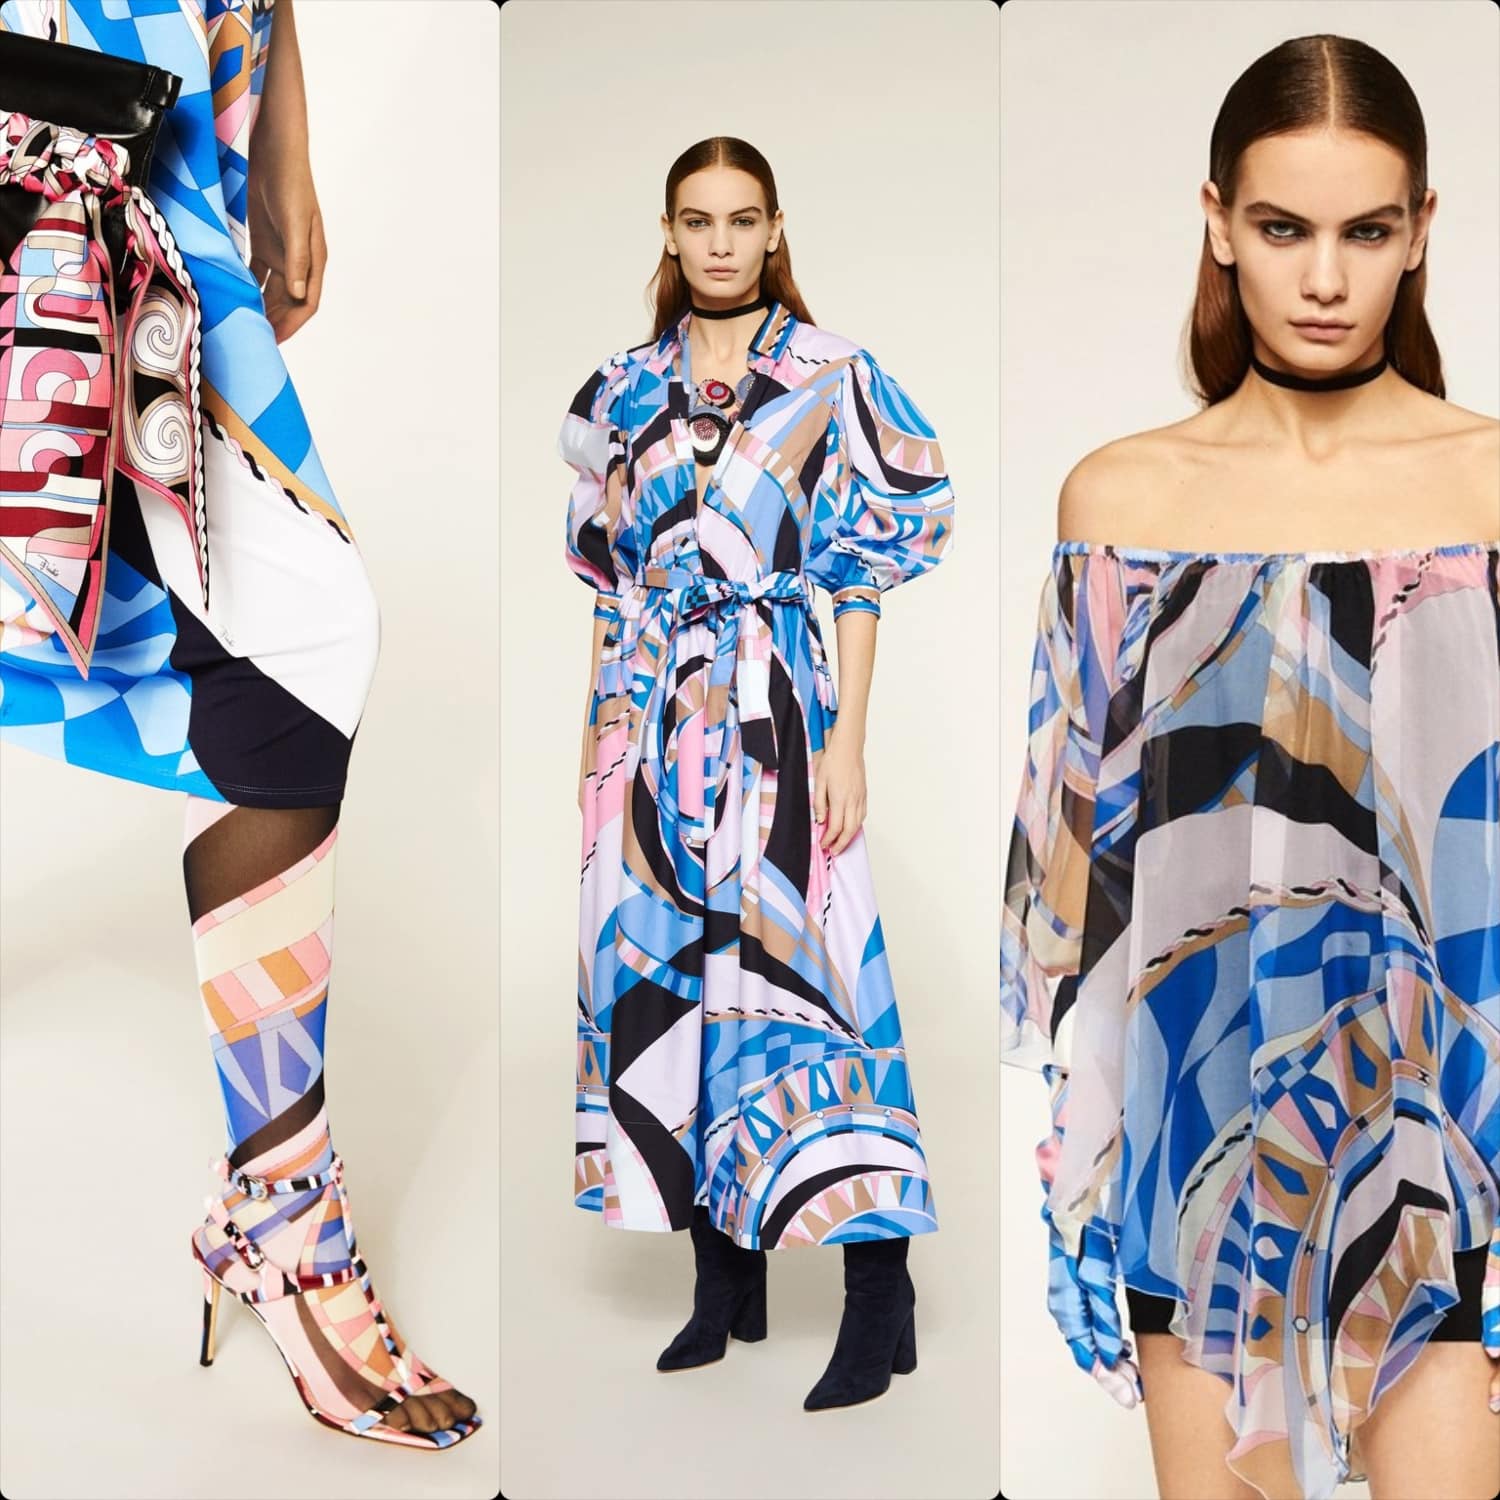 Emilio Pucci Pre-Fall 2020 Milan. RUNWAY MAGAZINE ® Collections. RUNWAY NOW / RUNWAY NEW